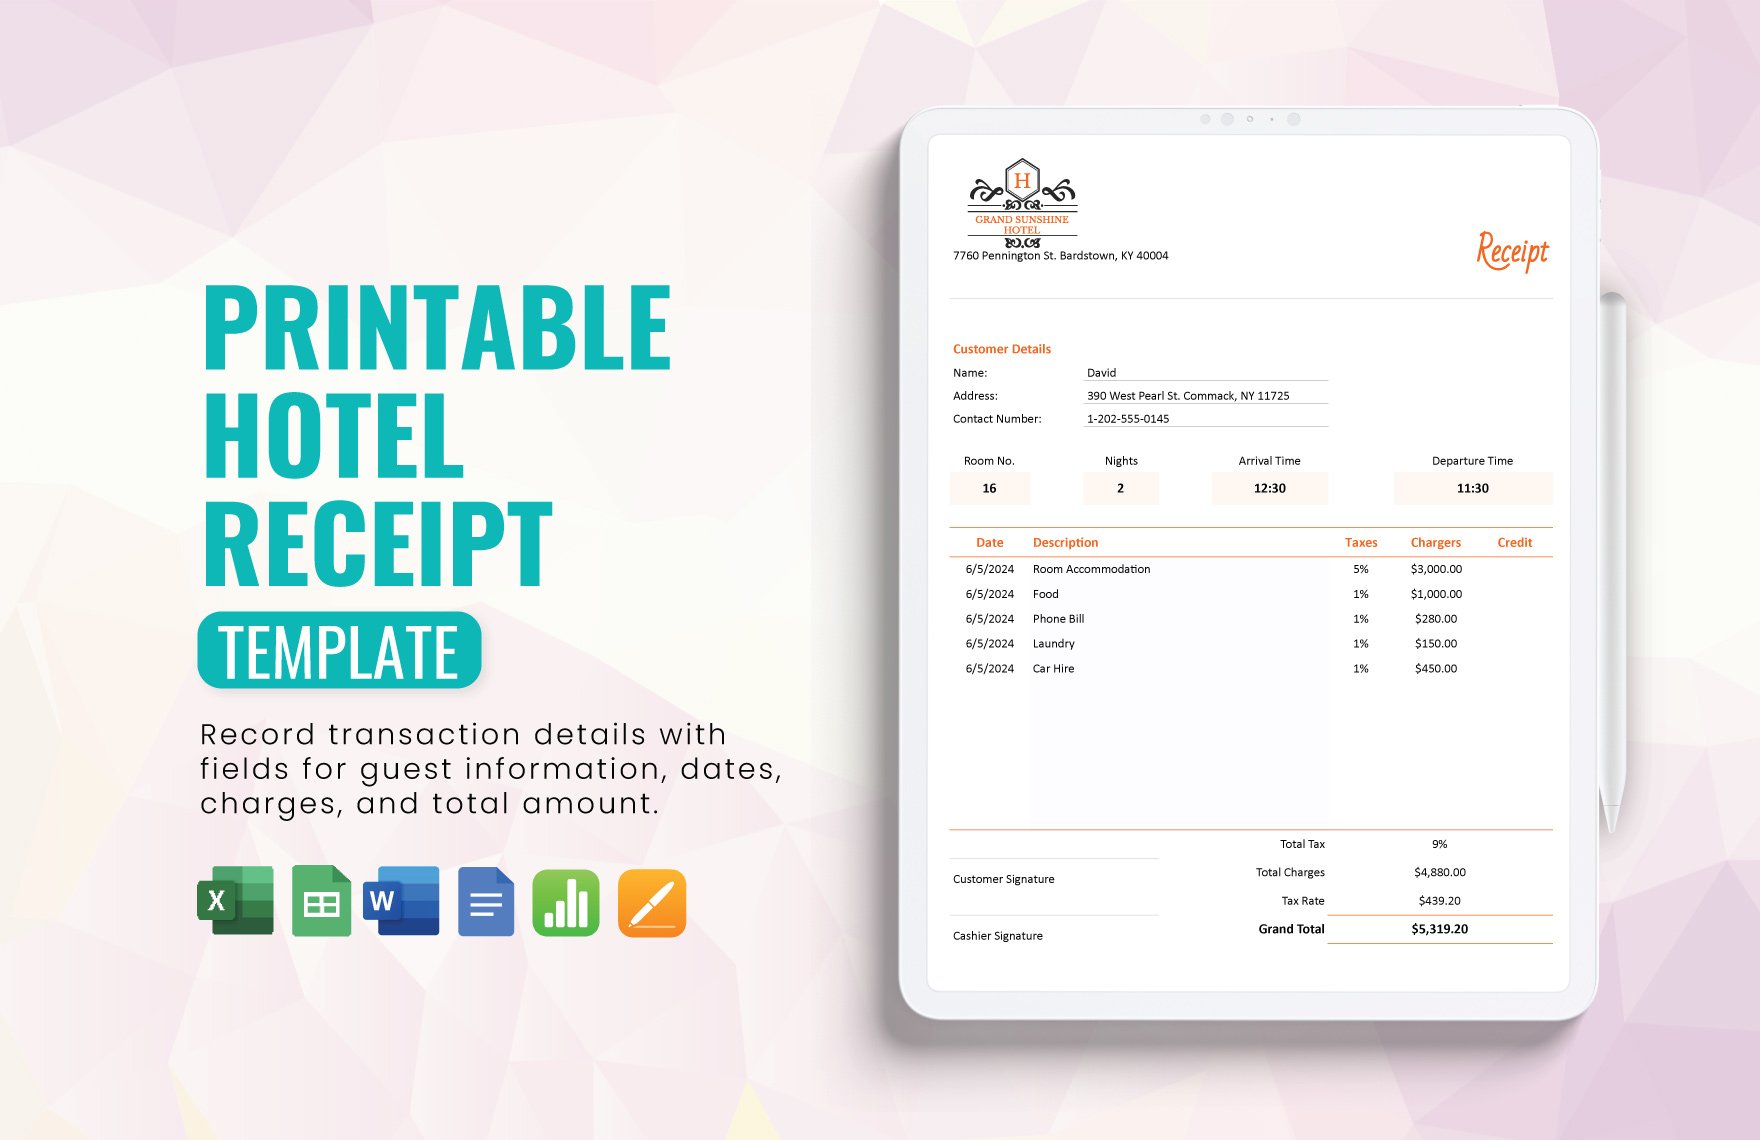 Printable Hotel Receipt Template in Word, Google Docs, Excel, Google Sheets, Apple Pages, Apple Numbers